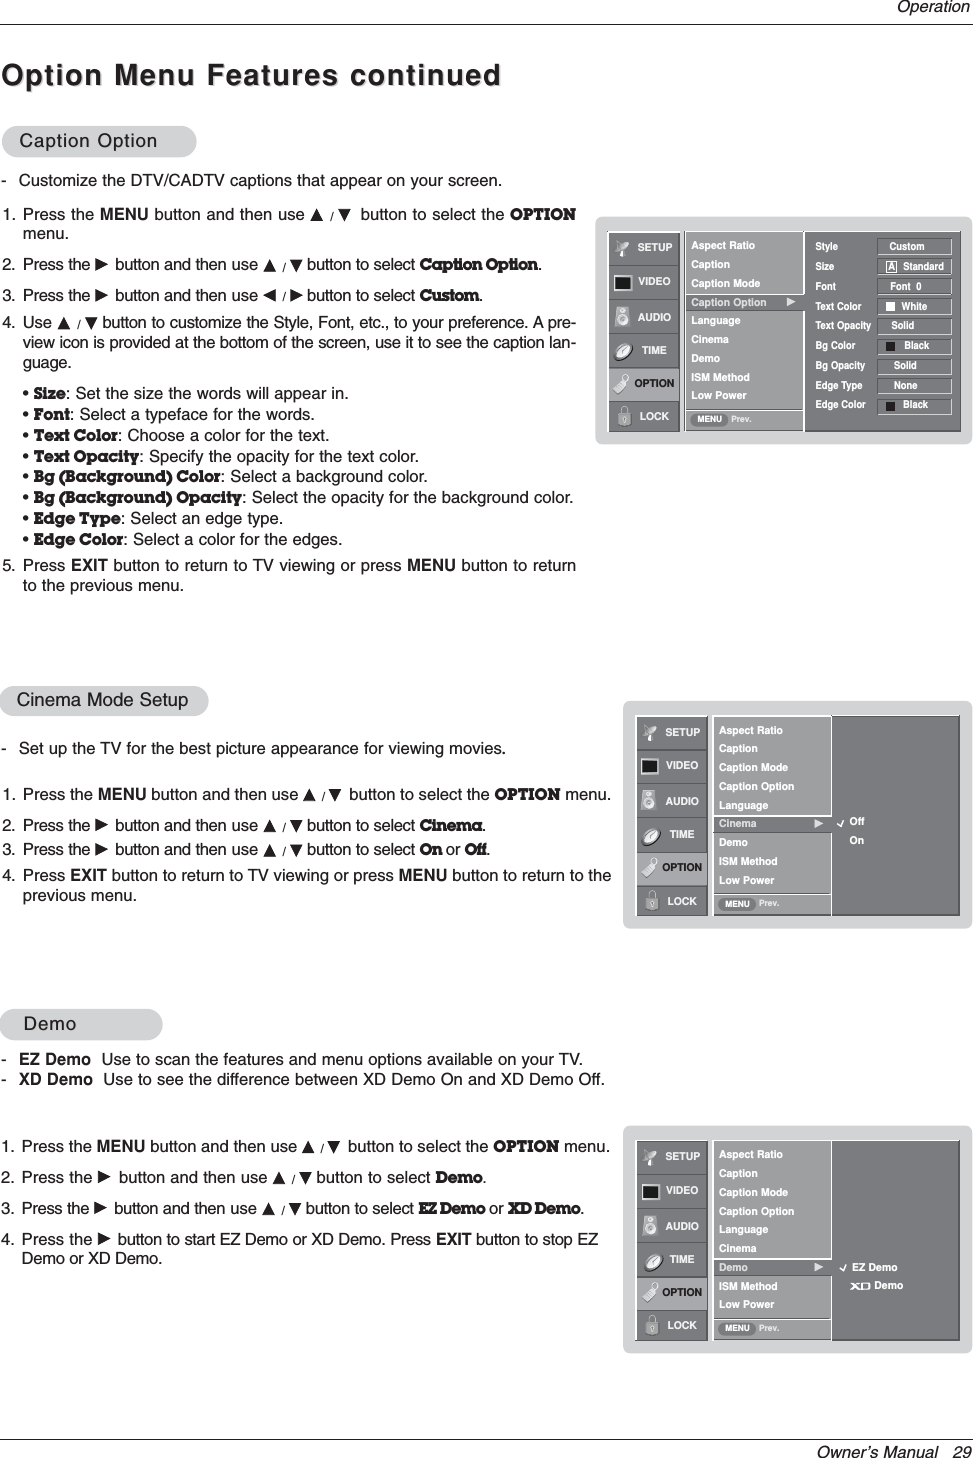 Owner’s Manual   29OperationOption Menu Features continuedOption Menu Features continuedSETUPVIDEOAUDIOTIMEOPTIONLOCK Prev.Aspect RatioCaptionCaption ModeCaption Option GLanguageCinemaDemoISM MethodLow PowerStyle                  CustomSize                   A StandardFont                   Font  0Text Color              WhiteText Opacity       Solid Bg Color                 BlackBg Opacity          SolidEdge Type           NoneEdge Color             BlackMENUCaption OptionCaption Option- Customize the DTV/CADTV captions that appear on your screen.1. Press the MENU button and then use D/Ebutton to select the OPTIONmenu.2. Press the Gbutton and then use D/Ebutton to select Caption Option.3. Press the Gbutton and then use F/Gbutton to select Custom.4. Use D/Ebutton to customize the Style, Font, etc., to your preference. A pre-view icon is provided at the bottom of the screen, use it to see the caption lan-guage.•Size: Set the size the words will appear in.•Font: Select a typeface for the words.•Text Color: Choose a color for the text.•Text Opacity: Specify the opacity for the text color.•Bg (Background) Color: Select a background color.•Bg (Background) Opacity: Select the opacity for the background color.•Edge Type: Select an edge type.•Edge Color: Select a color for the edges.5. Press EXIT button to return to TV viewing or press MENU button to returnto the previous menu.SETUPVIDEOAUDIOTIMEOPTIONLOCK Prev.MENUCinema Mode Setup- Set up the TV for the best picture appearance for viewing movies.1. Press the MENU button and then use DD/Ebutton to select the OPTION menu.2. Press the Gbutton and then use D/Ebutton to select Cinema.3. Press the Gbutton and then use D/Ebutton to select On or Off.4. Press EXIT button to return to TV viewing or press MENU button to return to theprevious menu.-EZ Demo Use to scan the features and menu options available on your TV.-XD Demo Use to see the difference between XD Demo On and XD Demo Off.1. Press the MENU button and then use D/Ebutton to select the OPTION menu.2. Press the Gbutton and then use D/Ebutton to select Demo.3. Press the Gbutton and then use D/Ebutton to select EZ Demo or XD Demo.4. Press the Gbutton to start EZ Demo or XD Demo. Press EXIT button to stop EZDemo or XD Demo.DemoDemoSETUPVIDEOAUDIOTIMEOPTIONLOCK Prev.Aspect RatioCaptionCaption ModeCaption OptionLanguageCinemaDemo GISM MethodLow PowerMENUEZ DemoDemoOffOnAspect RatioCaptionCaption ModeCaption OptionLanguageCinema GDemoISM MethodLow Power